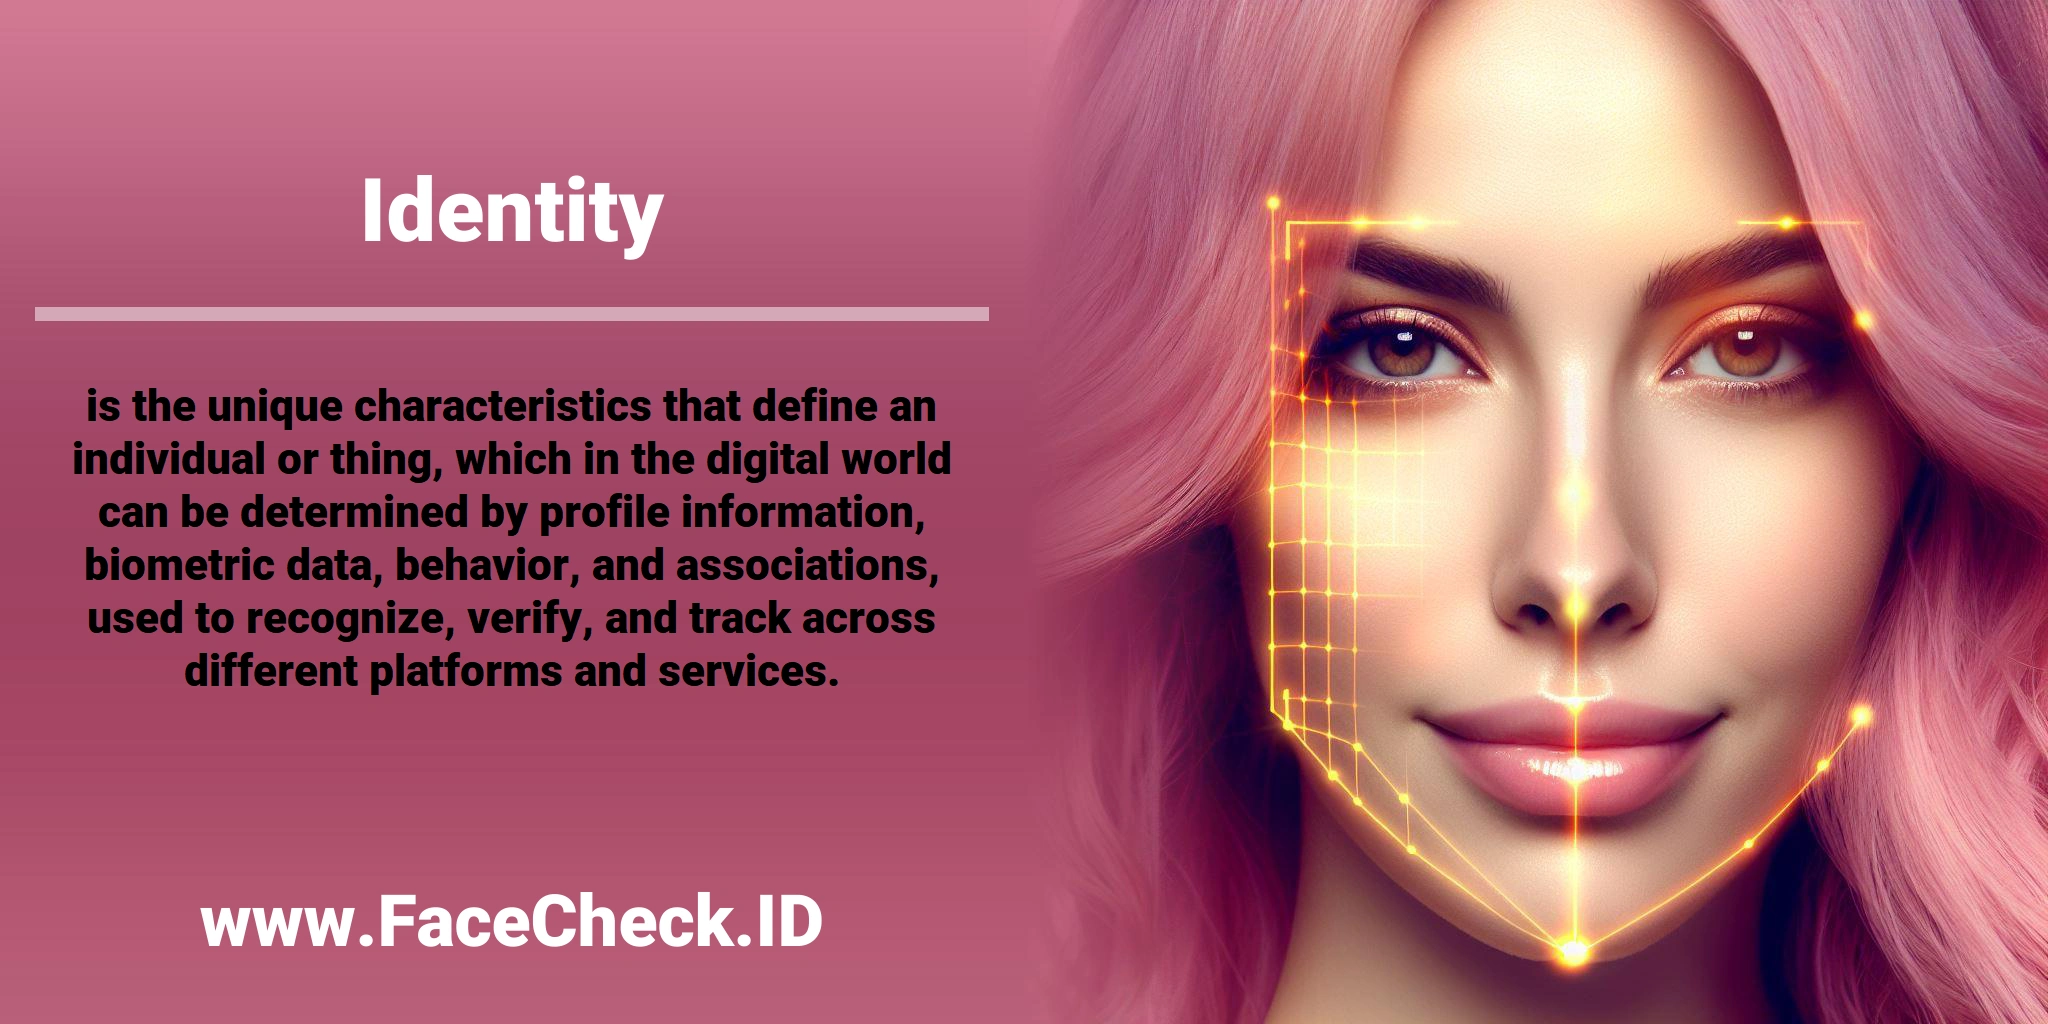 <b>Identity</b> is the unique characteristics that define an individual or thing, which in the digital world can be determined by profile information, biometric data, behavior, and associations, used to recognize, verify, and track across different platforms and services.